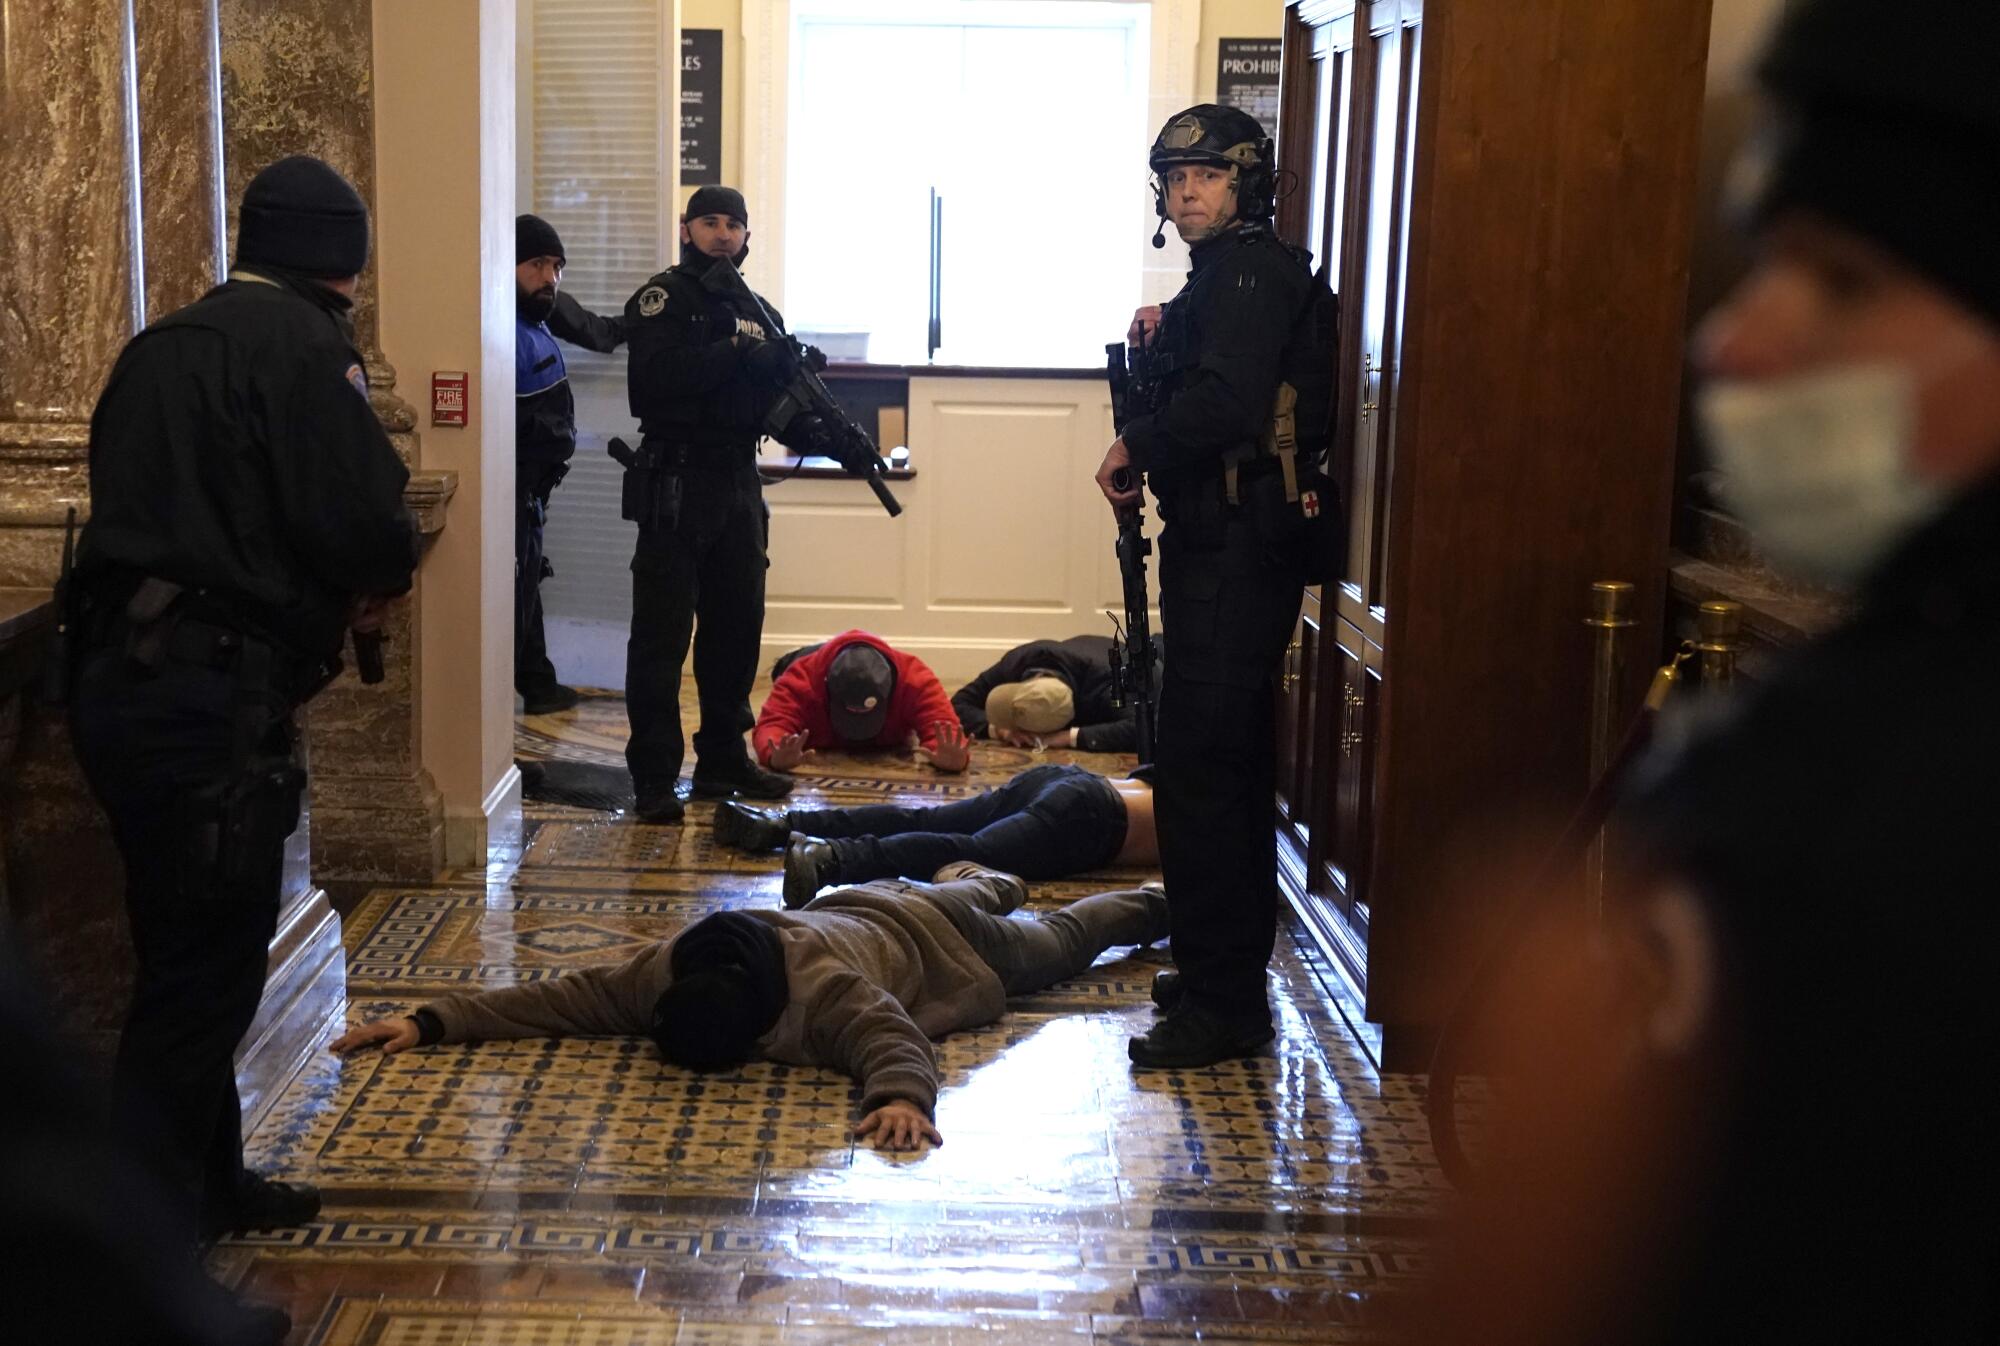 Police hold guns on several people lying face down on the floor in a Capitol hallway.